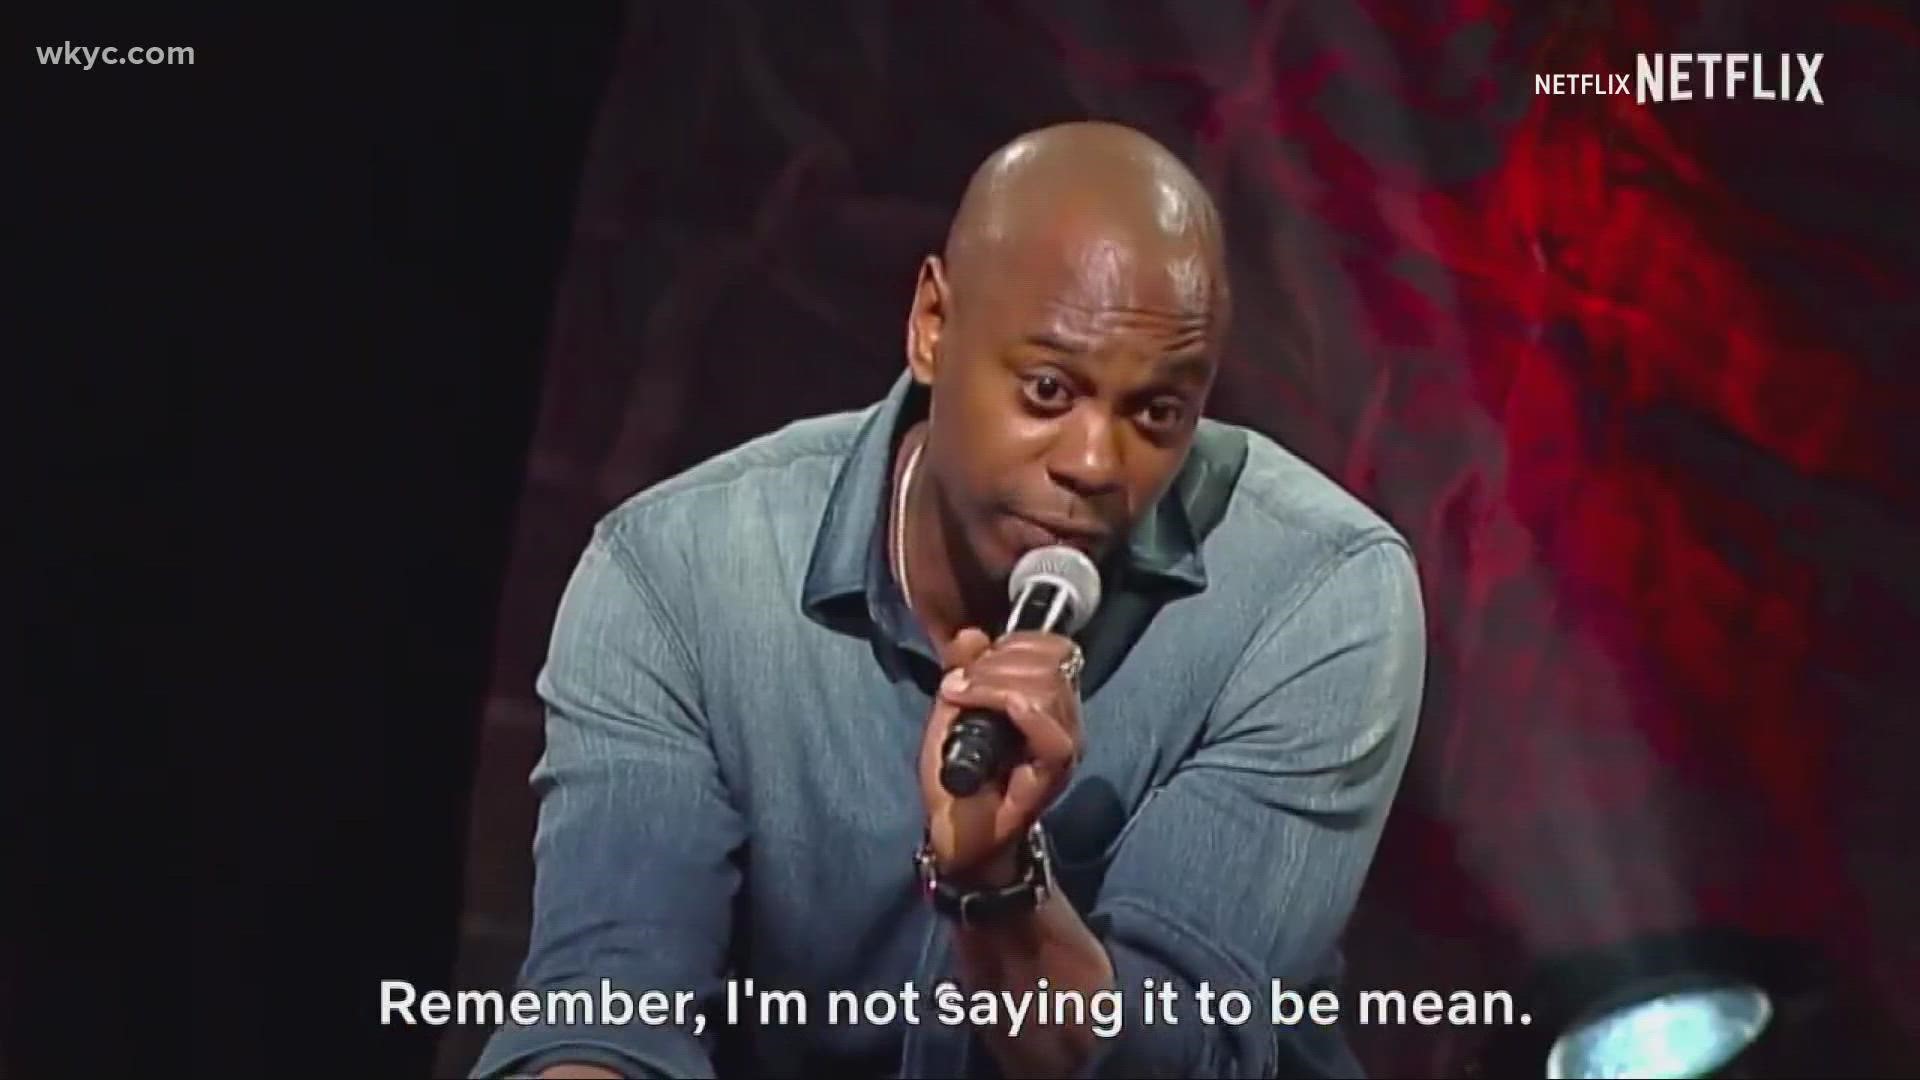 Dave Chapelle is yet again on the receiving end of backlash from the LGBTQ+ community.